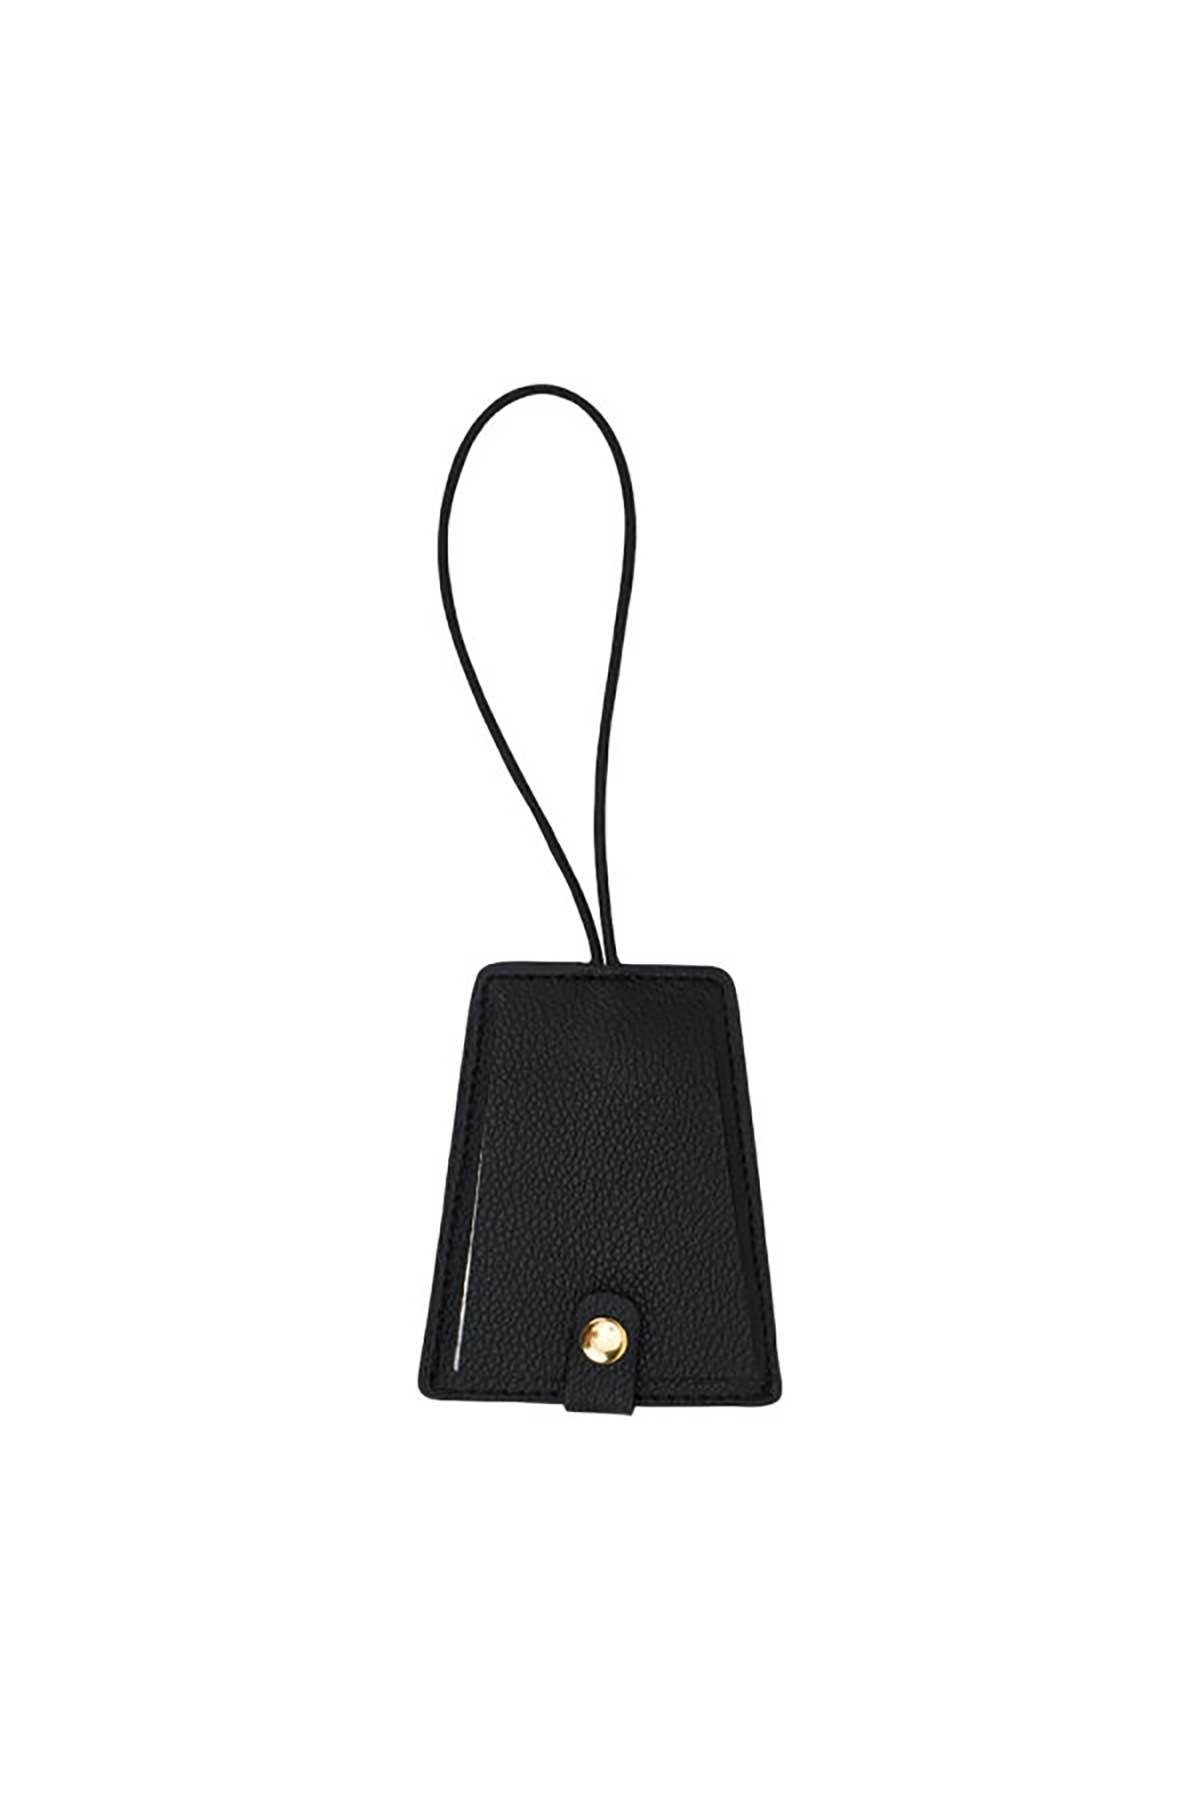 Annabel Trends Vanity Luggage Tag Black Button Closure